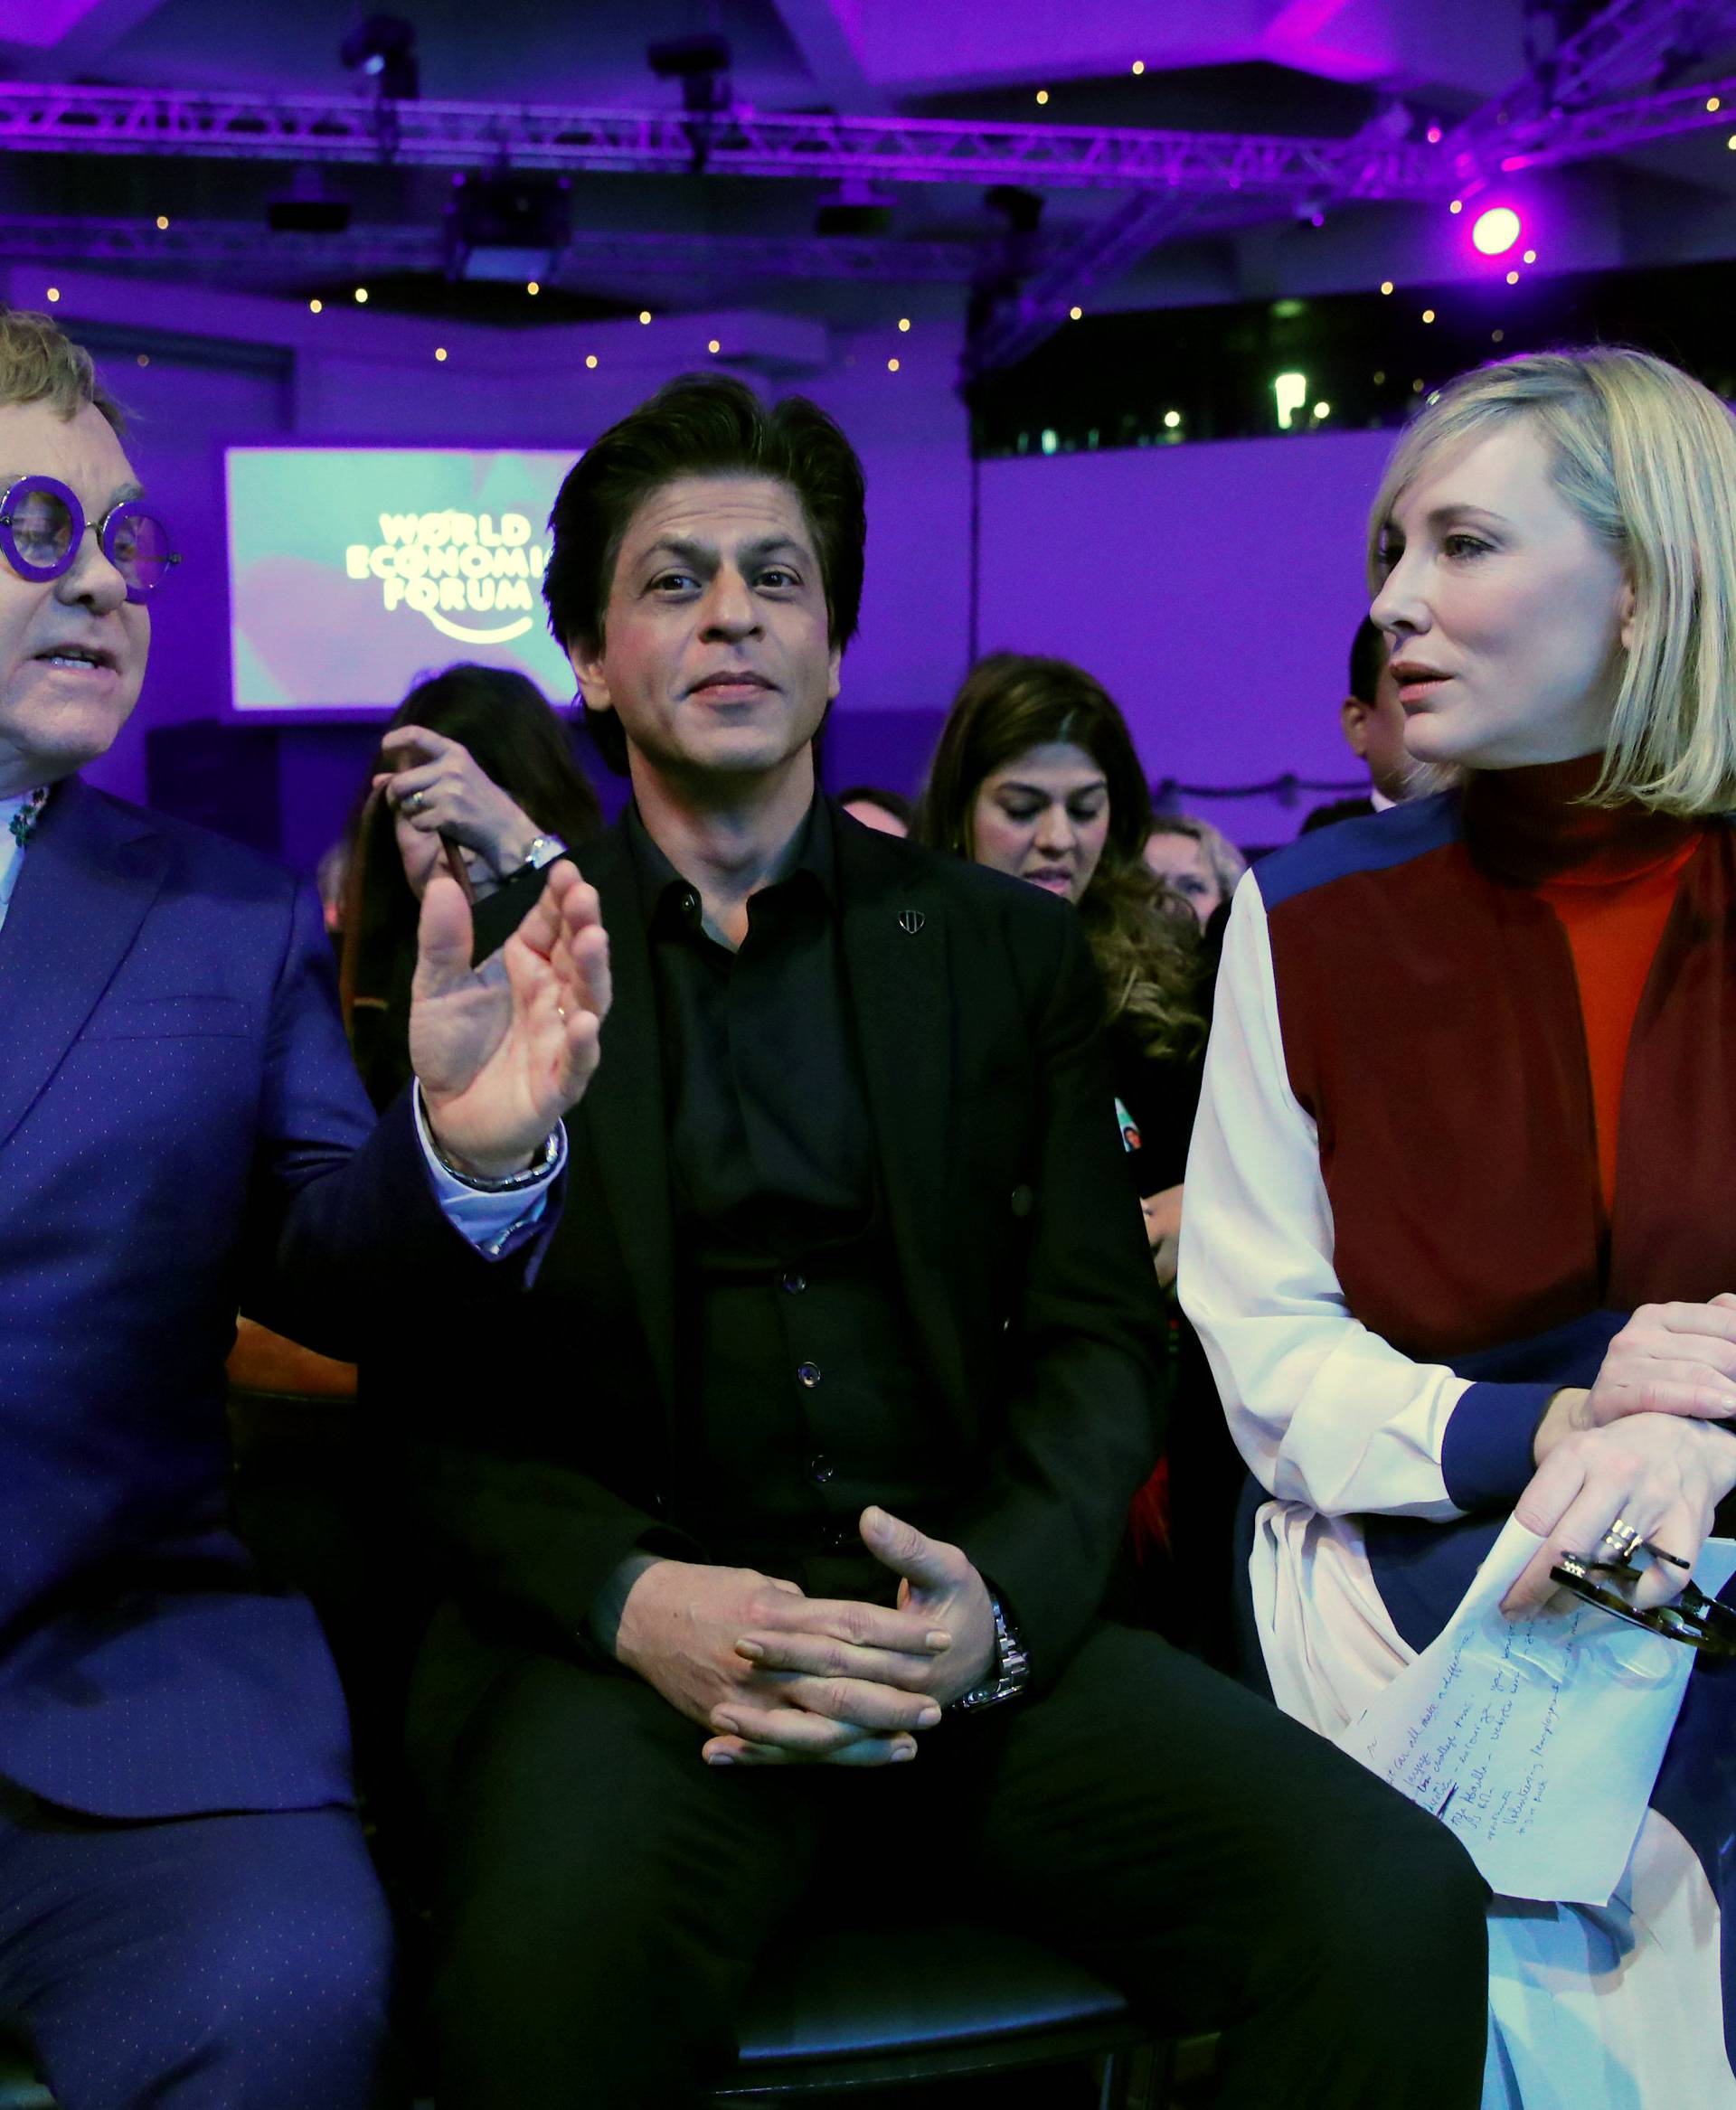 Actor Cate Blanchett, actor Shah Rukh Khan and singer Elton John are pictured at the Crystal Awards ceremony of the annual meeting of the World Economic Forum (WEF) in Davos